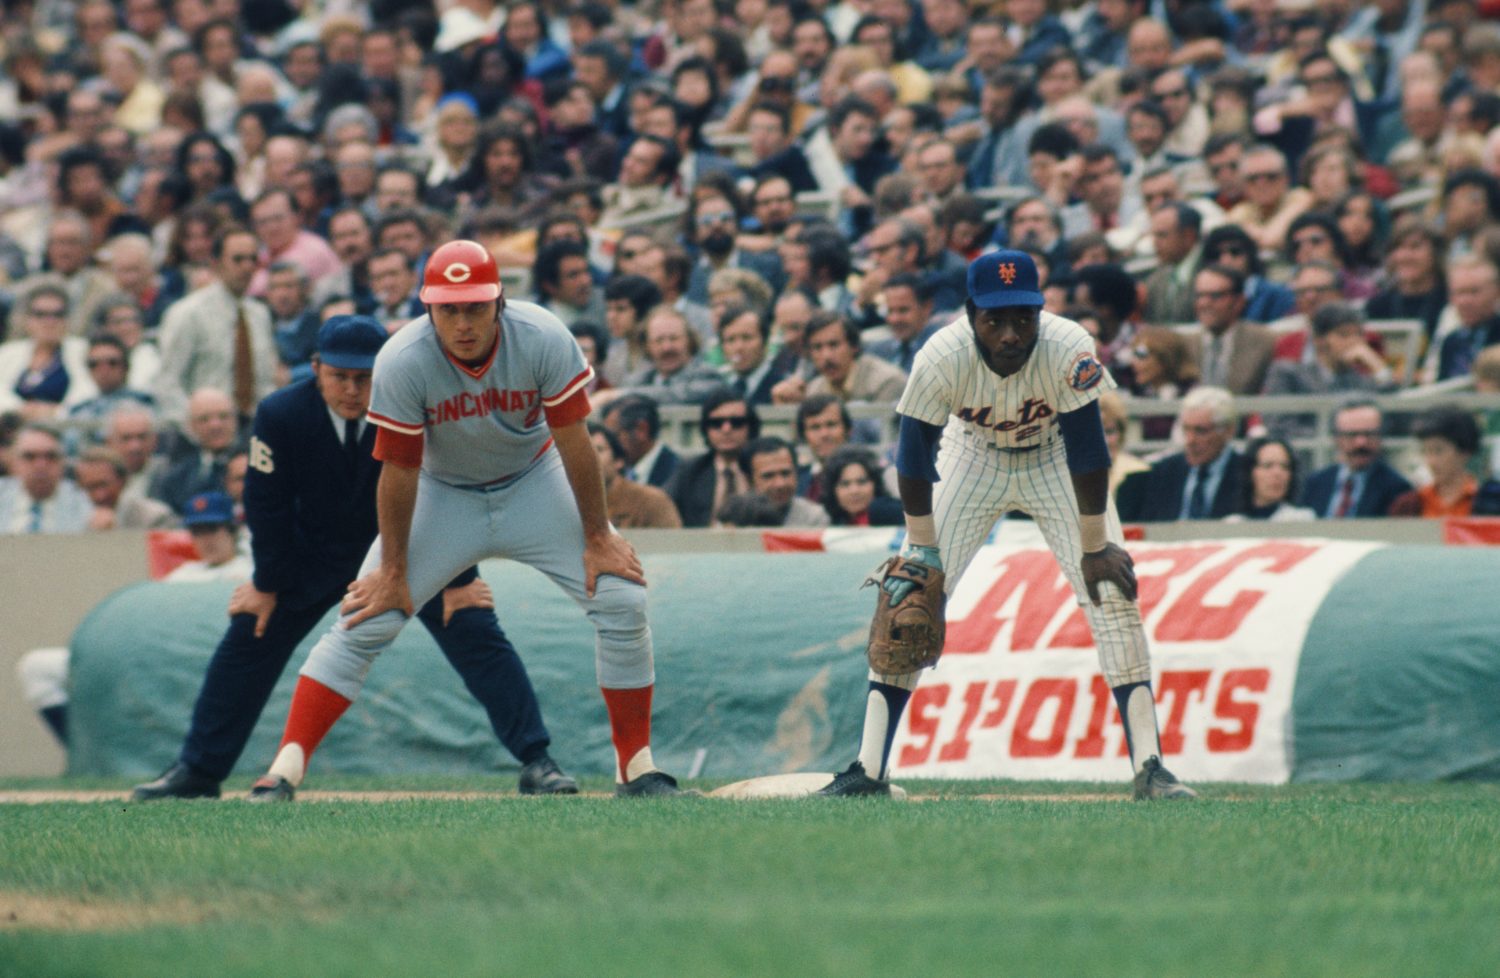 Milner at First Base in 1973 NLCS